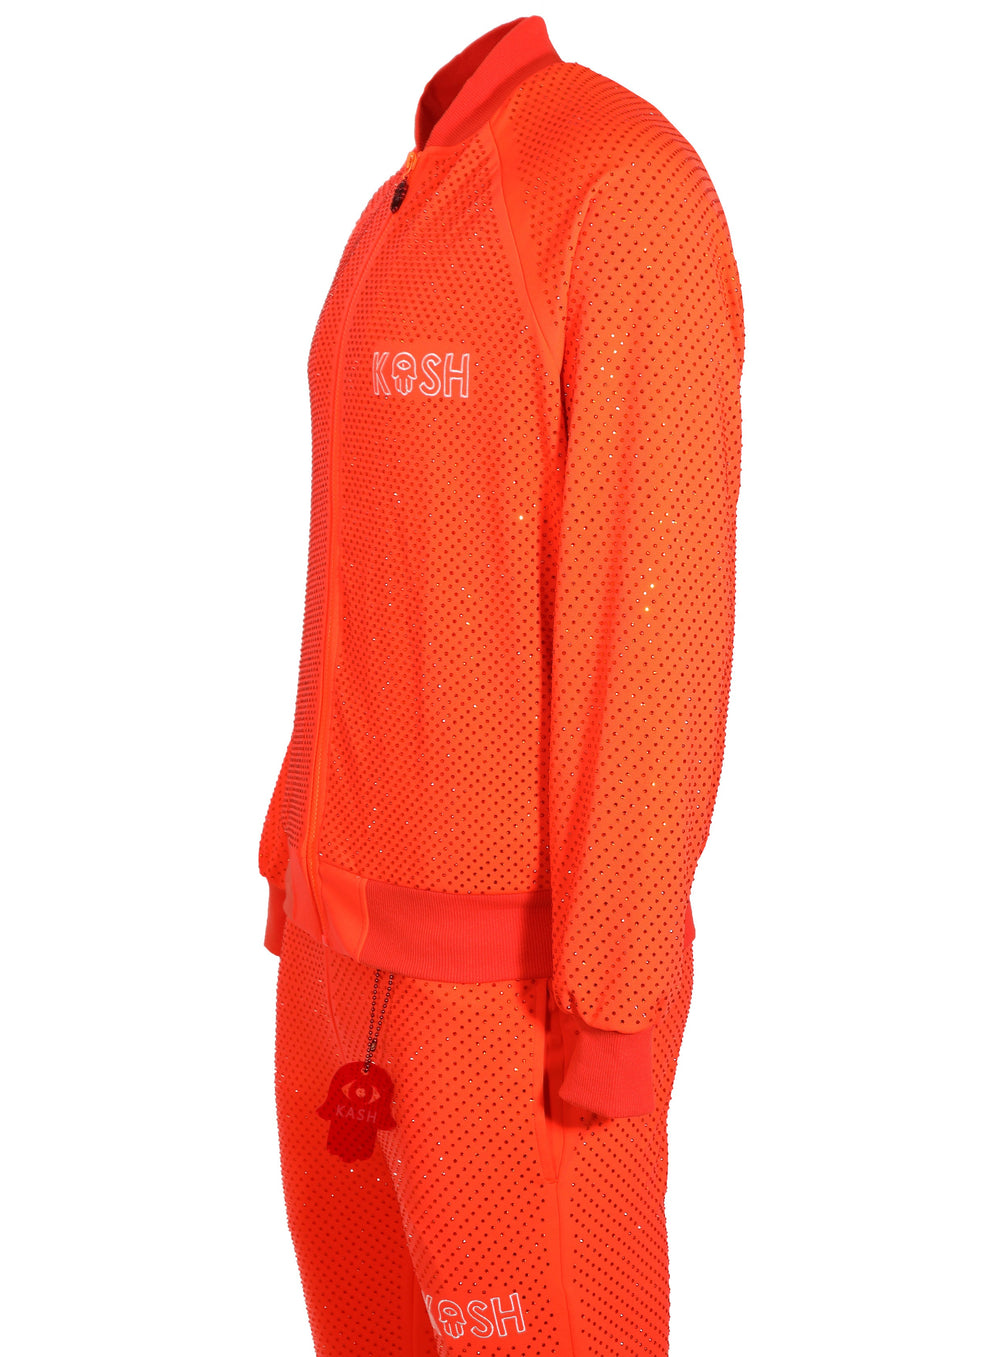 Kash All over diamond track jacket Zip closure Color: Orange 100% Polyester Wrinkle Free Material Fits true to size